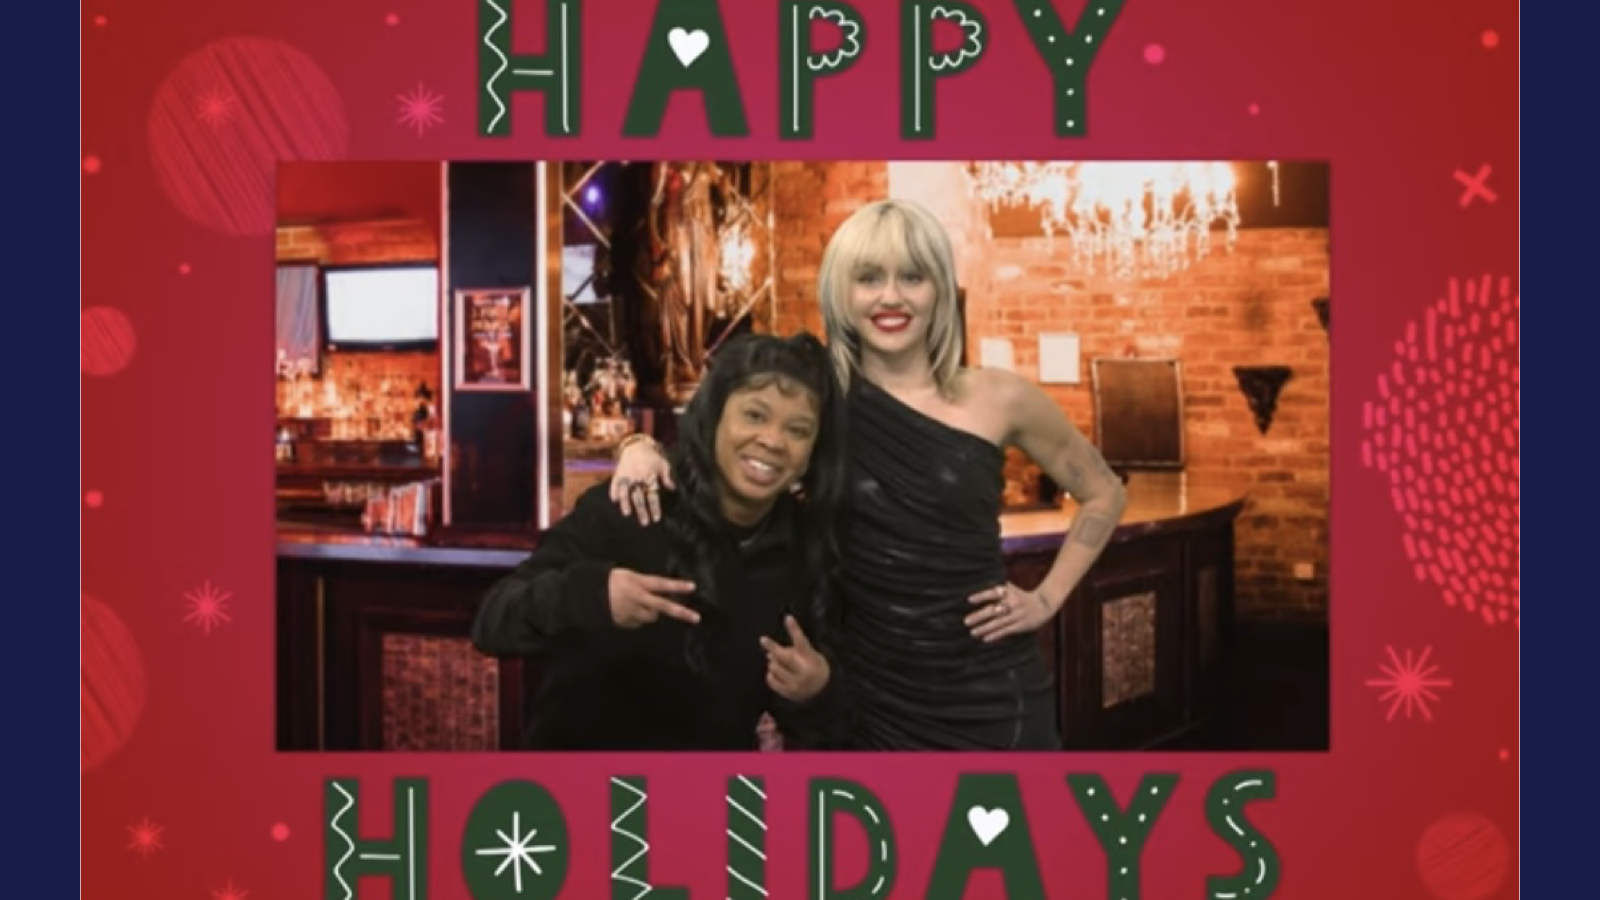 Punkie Johnson (left) poses with Miley Cyrus (right) in a Christmas card in one 'SNL' sketch